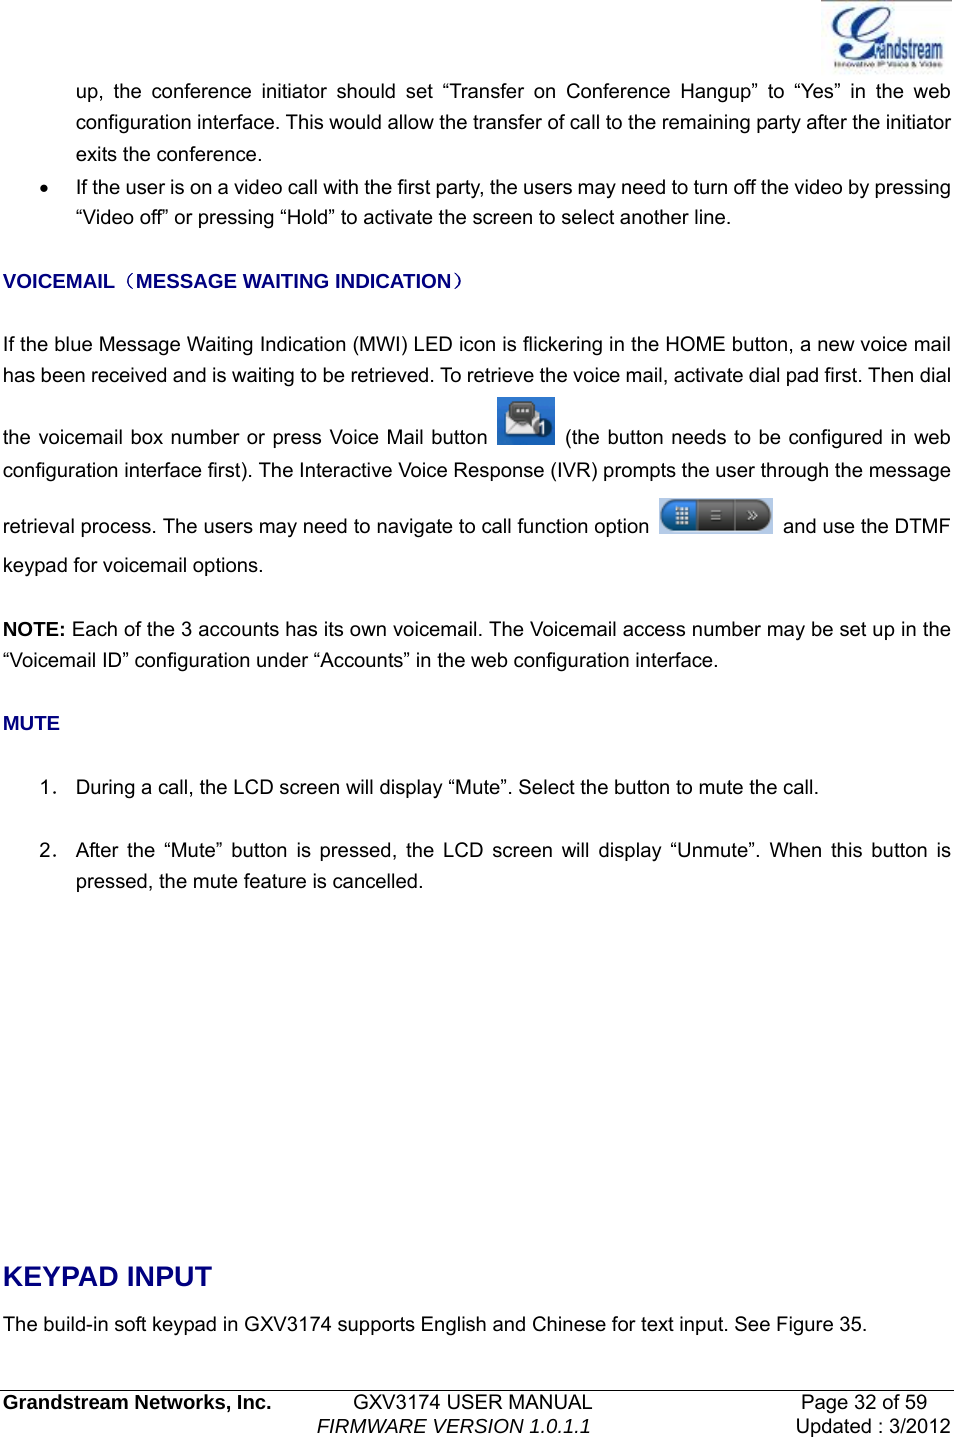   Grandstream Networks, Inc.        GXV3174 USER MANUAL                     Page 32 of 59                                FIRMWARE VERSION 1.0.1.1  Updated : 3/2012  up, the conference initiator should set “Transfer on Conference Hangup” to “Yes” in the web configuration interface. This would allow the transfer of call to the remaining party after the initiator exits the conference.   •  If the user is on a video call with the first party, the users may need to turn off the video by pressing “Video off” or pressing “Hold” to activate the screen to select another line.  VOICEMAIL（MESSAGE WAITING INDICATION）  If the blue Message Waiting Indication (MWI) LED icon is flickering in the HOME button, a new voice mail has been received and is waiting to be retrieved. To retrieve the voice mail, activate dial pad first. Then dial the voicemail box number or press Voice Mail button    (the button needs to be configured in web configuration interface first). The Interactive Voice Response (IVR) prompts the user through the message retrieval process. The users may need to navigate to call function option    and use the DTMF keypad for voicemail options.  NOTE: Each of the 3 accounts has its own voicemail. The Voicemail access number may be set up in the “Voicemail ID” configuration under “Accounts” in the web configuration interface.  MUTE  1． During a call, the LCD screen will display “Mute”. Select the button to mute the call.  2． After the “Mute” button is pressed, the LCD screen will display “Unmute”. When this button is pressed, the mute feature is cancelled.       KEYPAD INPUT The build-in soft keypad in GXV3174 supports English and Chinese for text input. See Figure 35. 